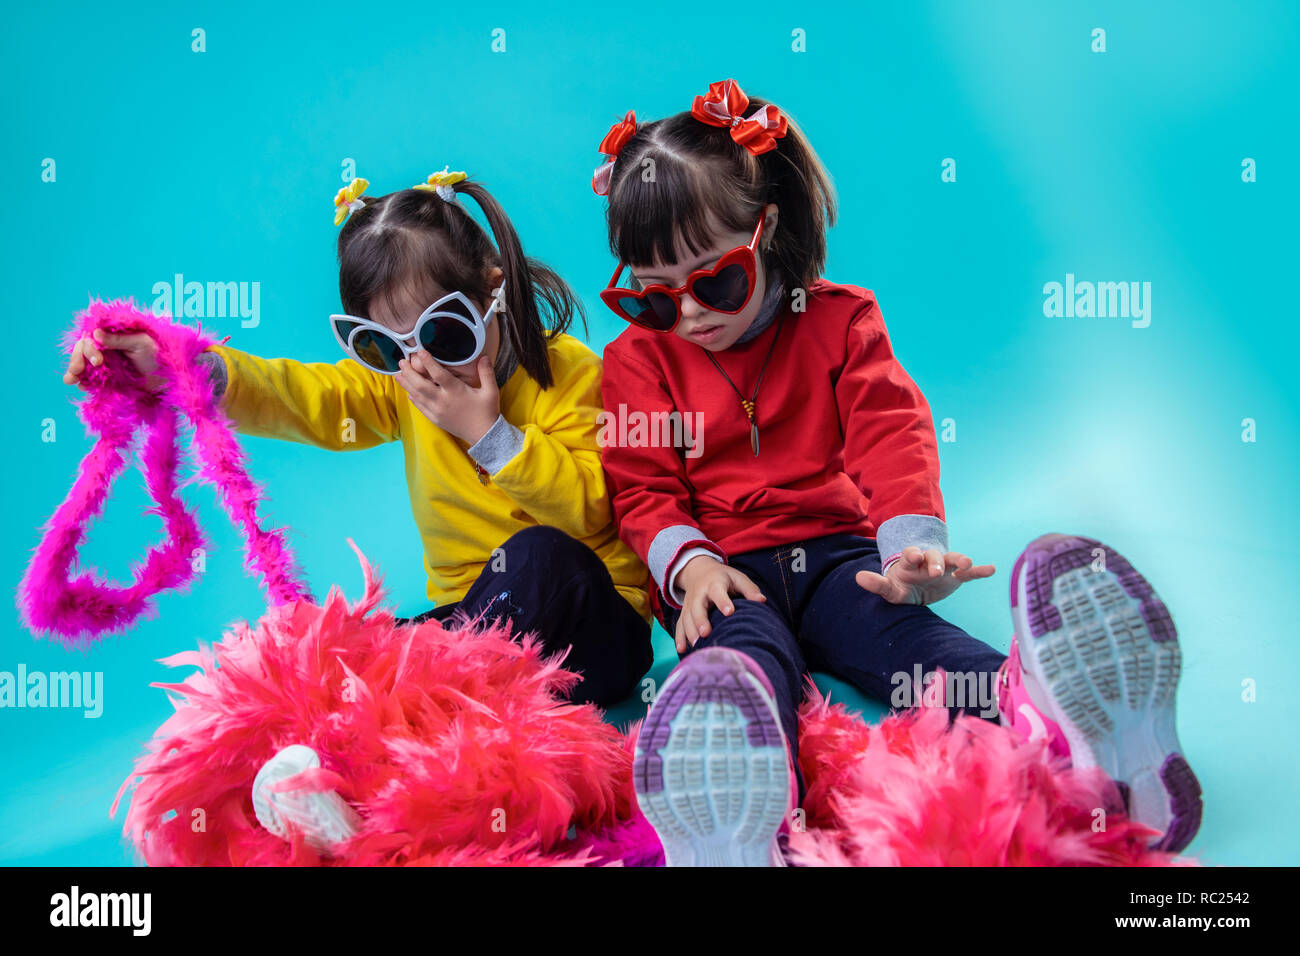 Stylish adorable girls with down syndrome playing with decoration Stock Photo